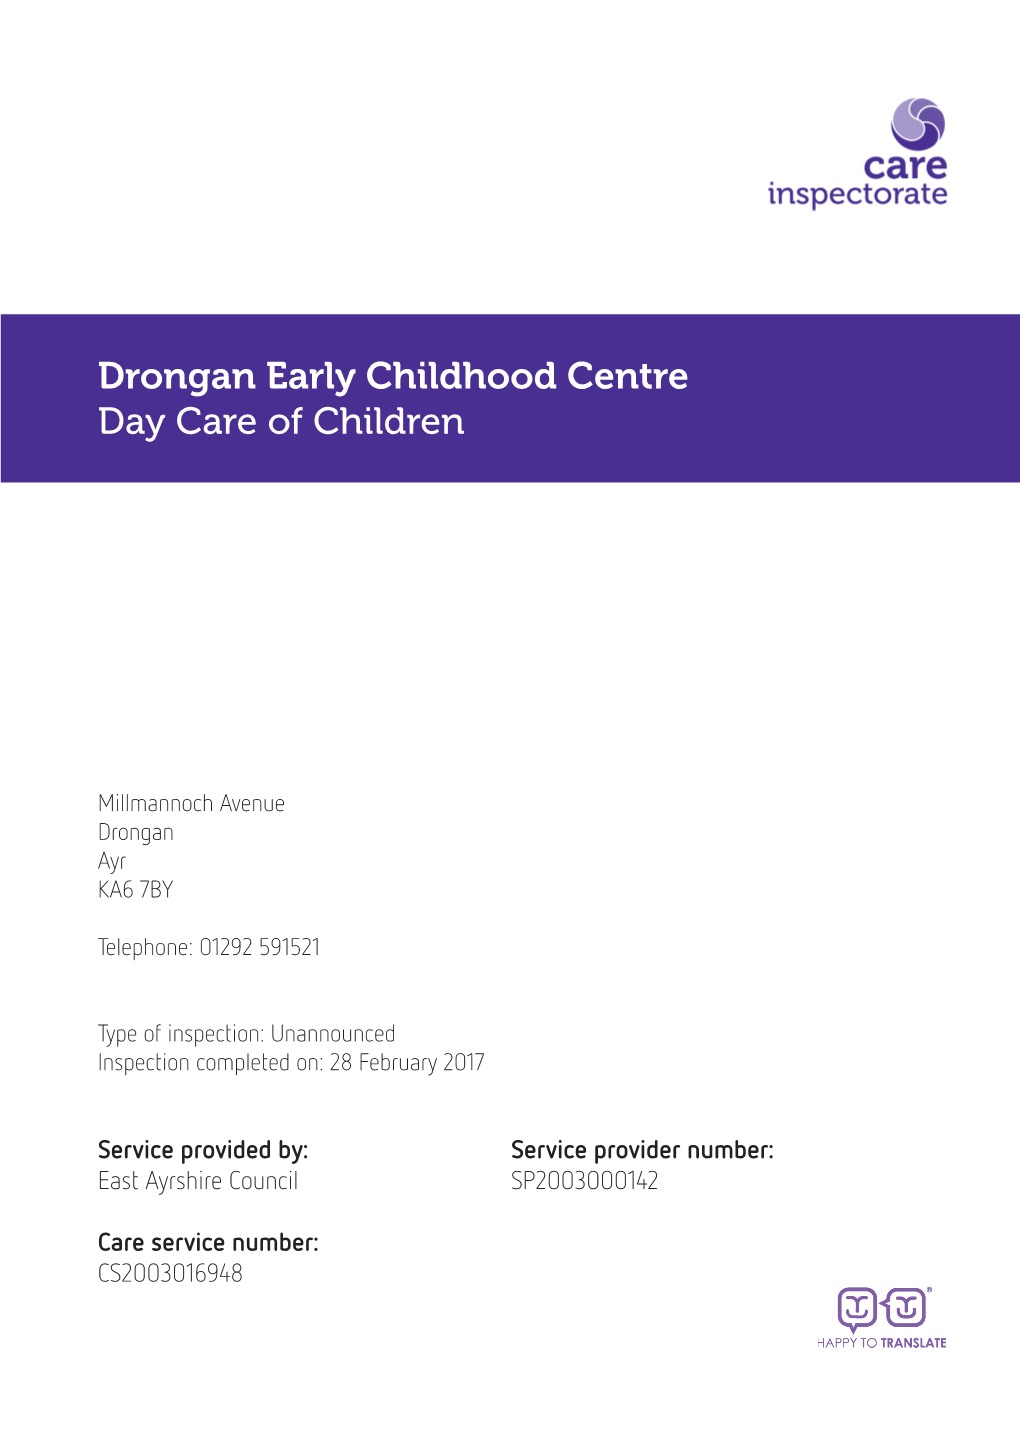 Drongan Early Childhood Centre Day Care of Children